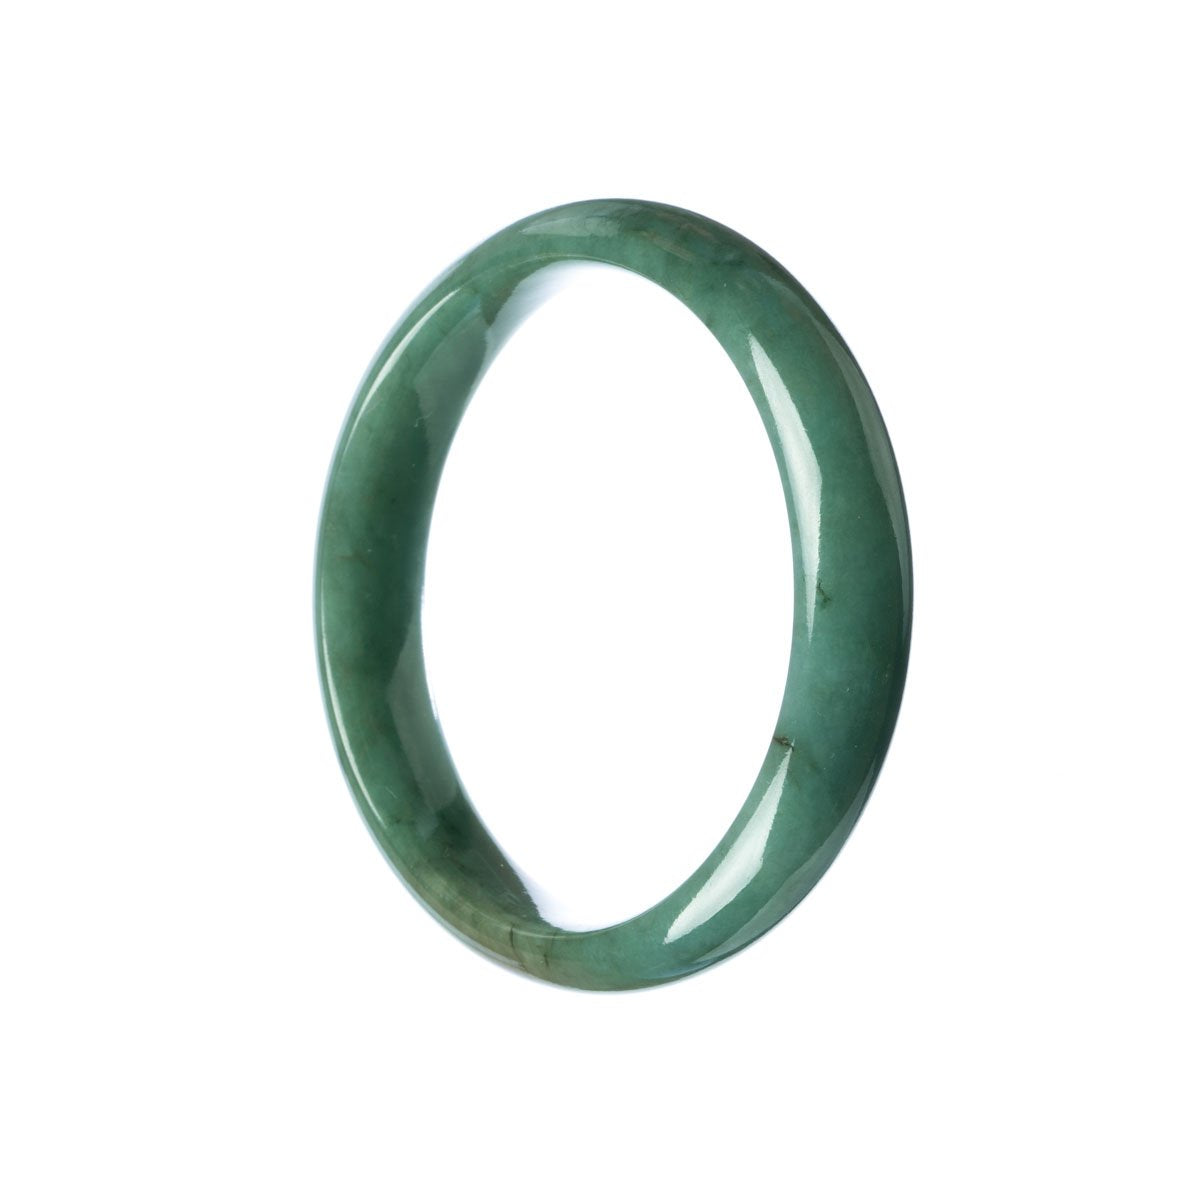 A beautiful half moon-shaped Green Jade bracelet, made from authentic Grade A jade. Designed by MAYS, it measures 57mm in size.